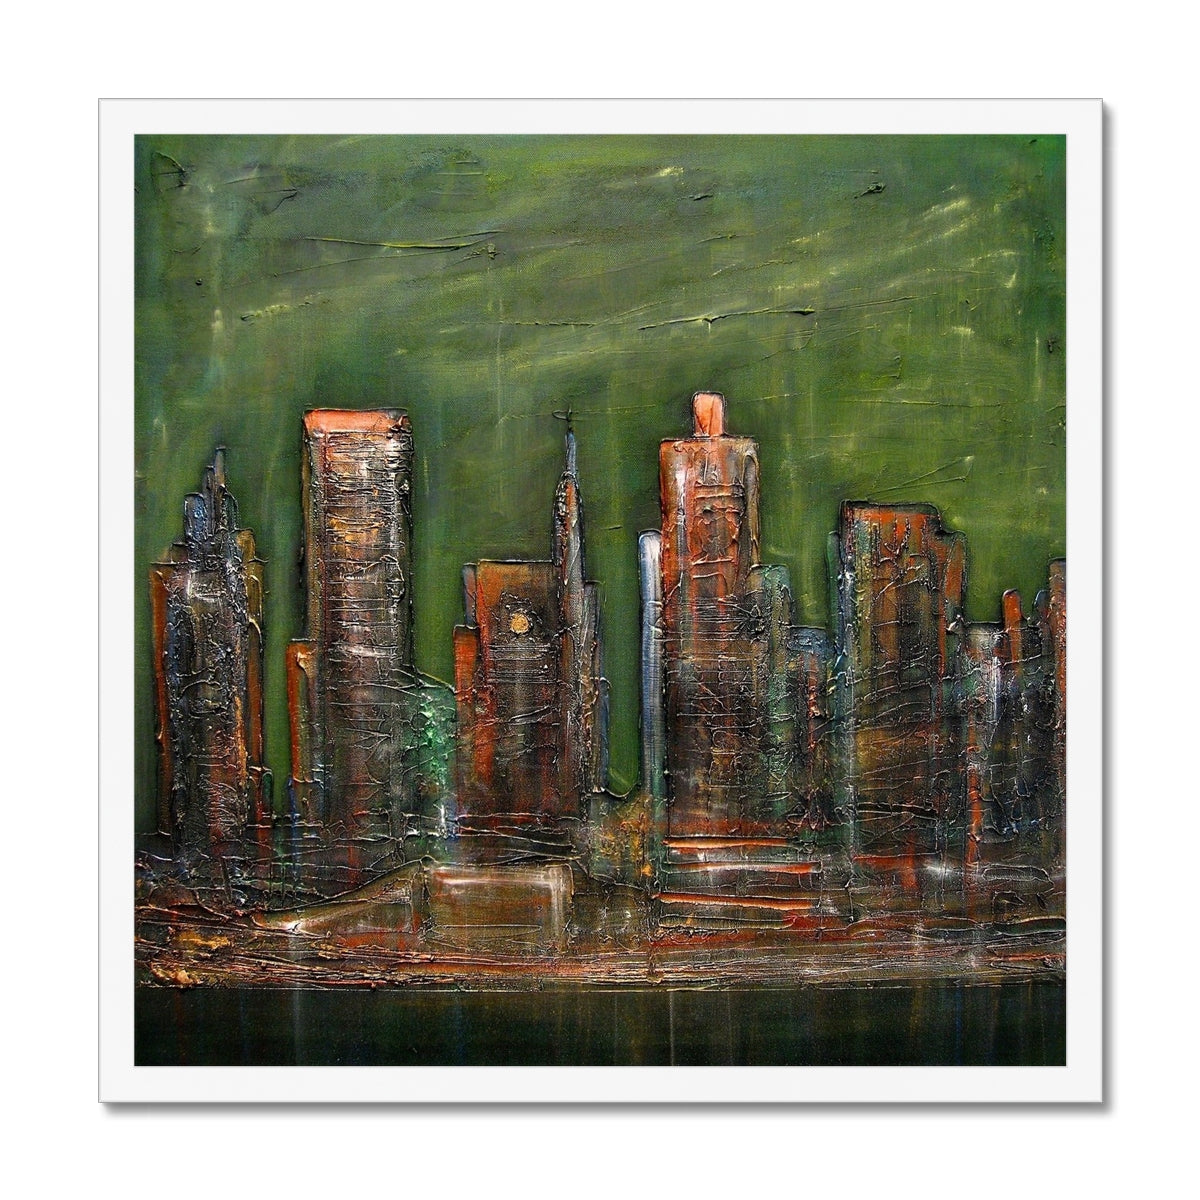 A Neon New York Painting | Framed Prints From Scotland-Framed Prints-World Art Gallery-20"x20"-White Frame-Paintings, Prints, Homeware, Art Gifts From Scotland By Scottish Artist Kevin Hunter